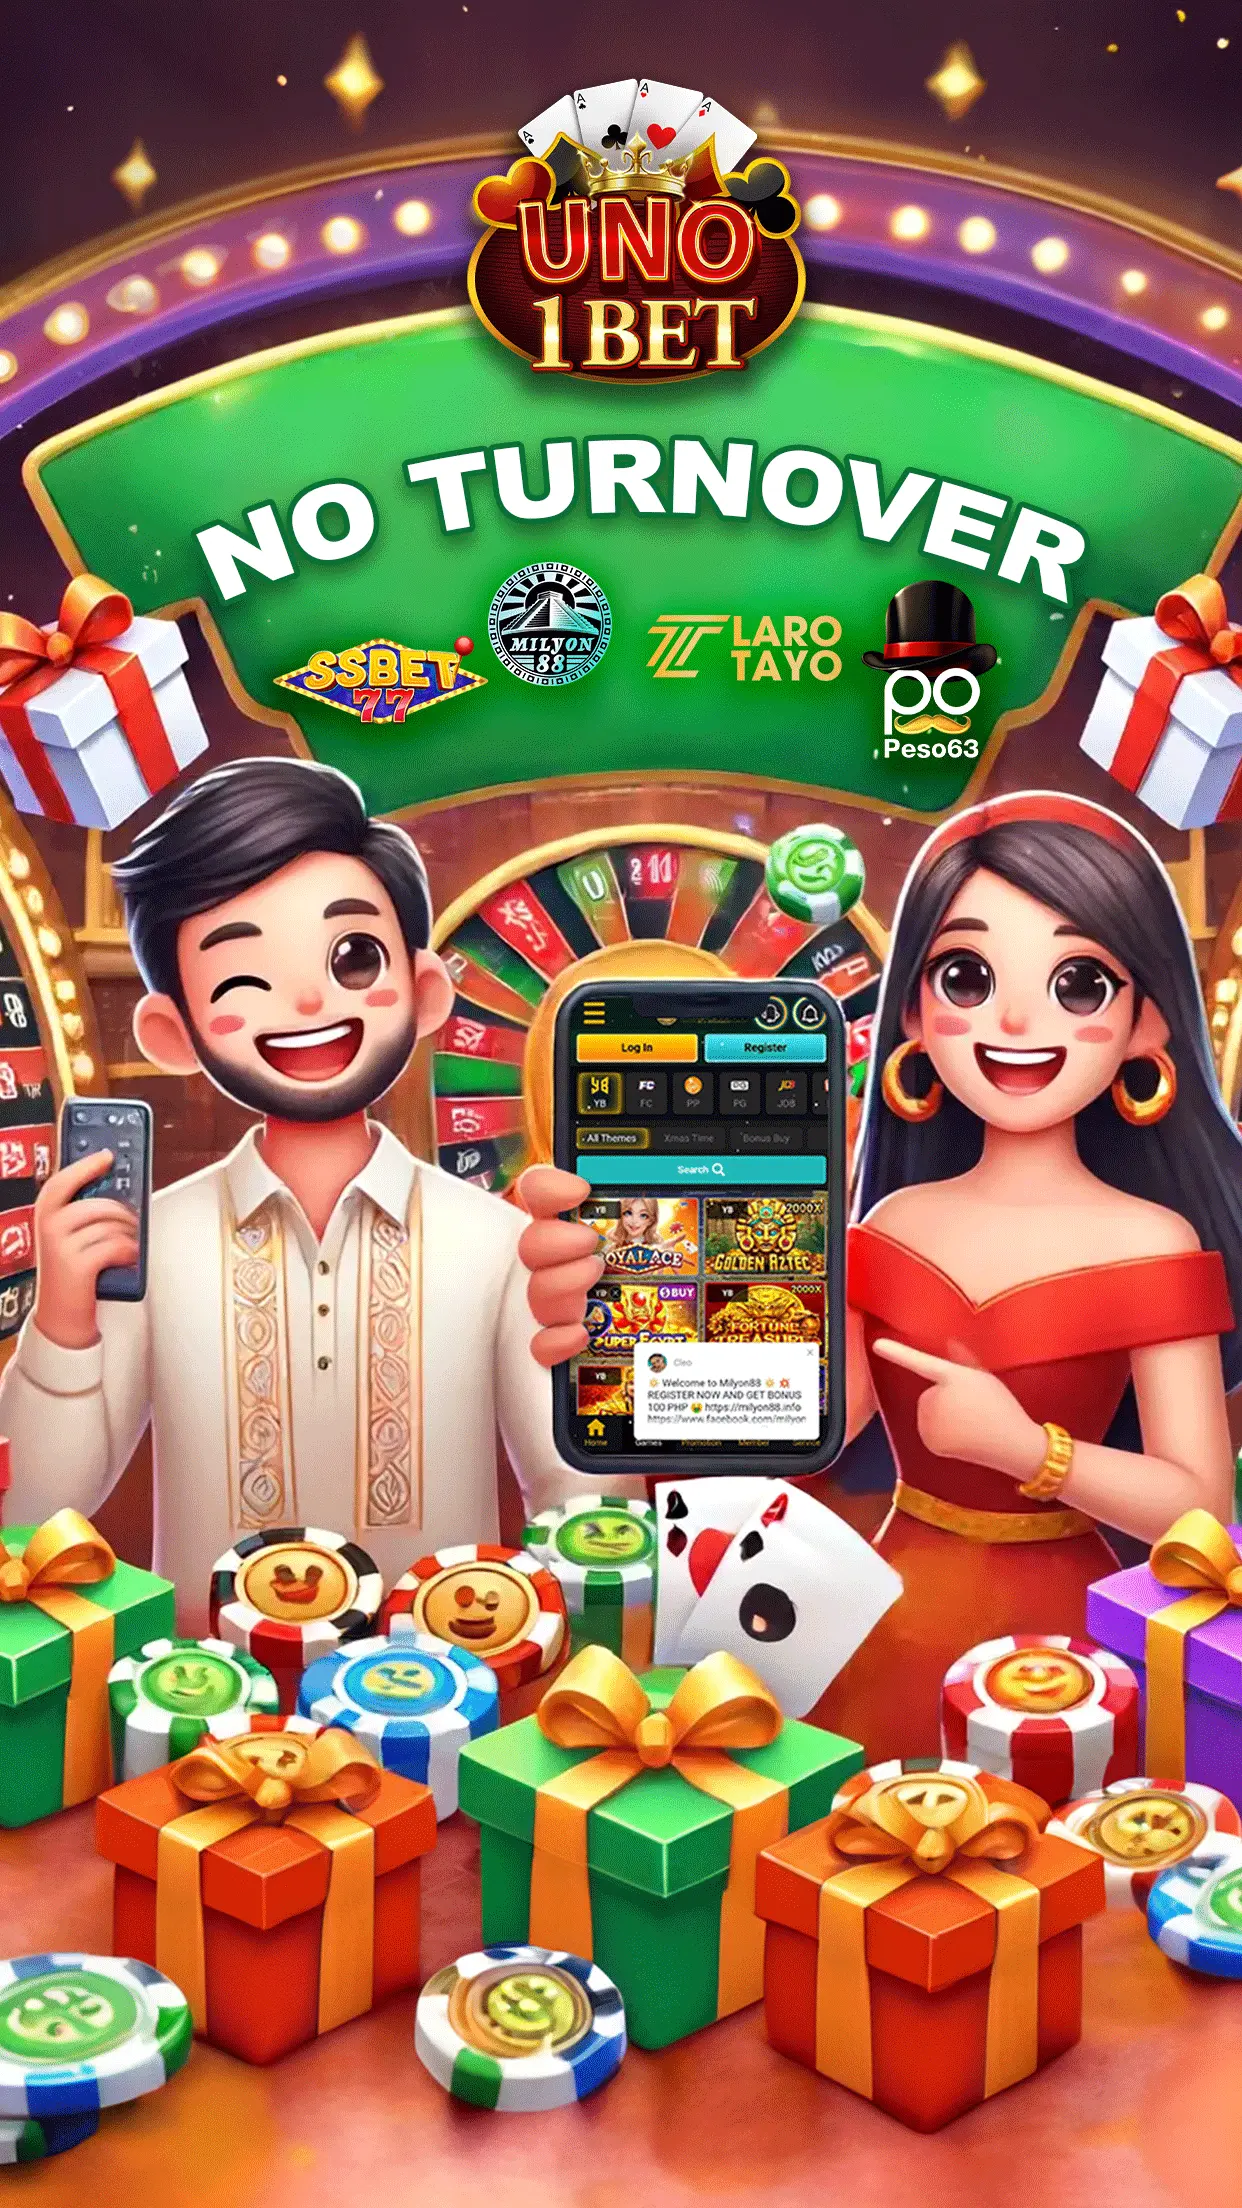  List of No turnover bonuses & promos available at Casino Philippines